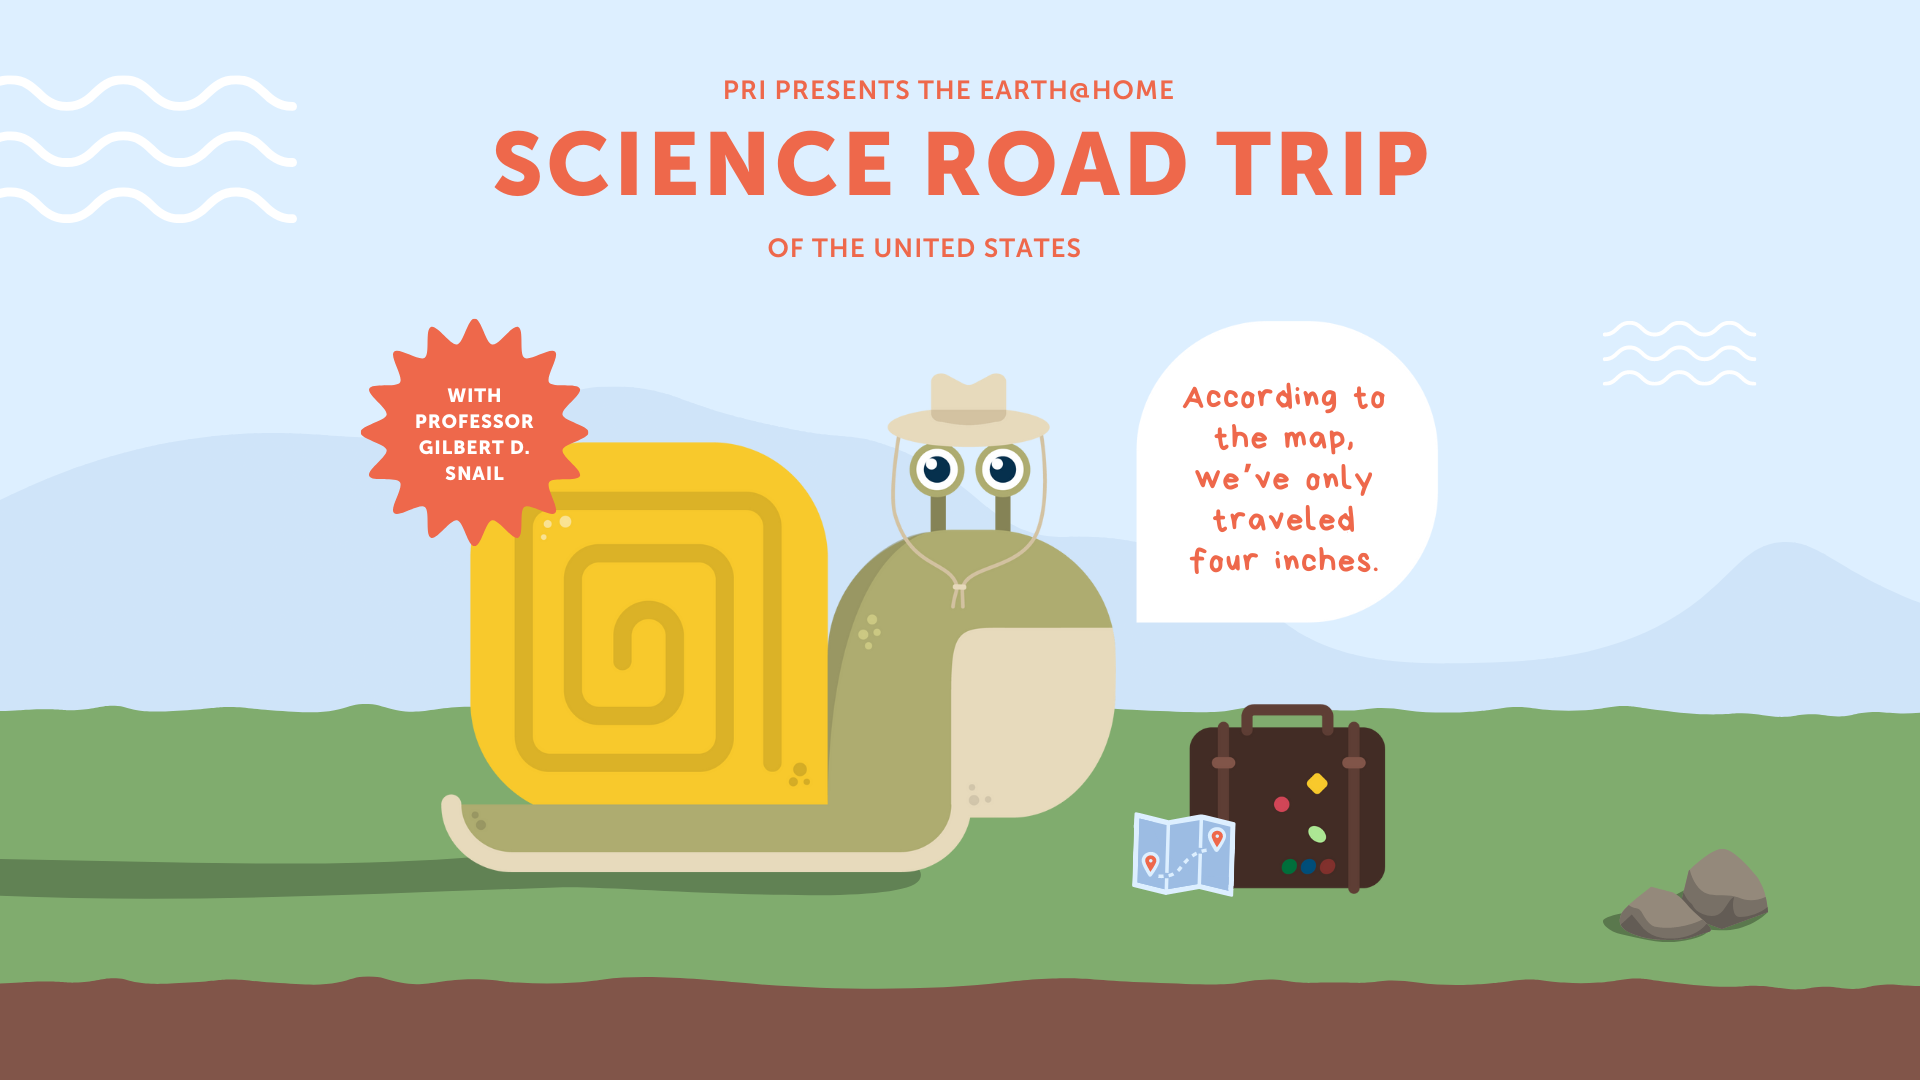 Graphic for Science Road Trip featuring Gilbert D. Snail, a snail with a paleontologist hat and with a suitcase. Speech bubble from Gilbert reads: According to the map, we’ve only traveled four inches.